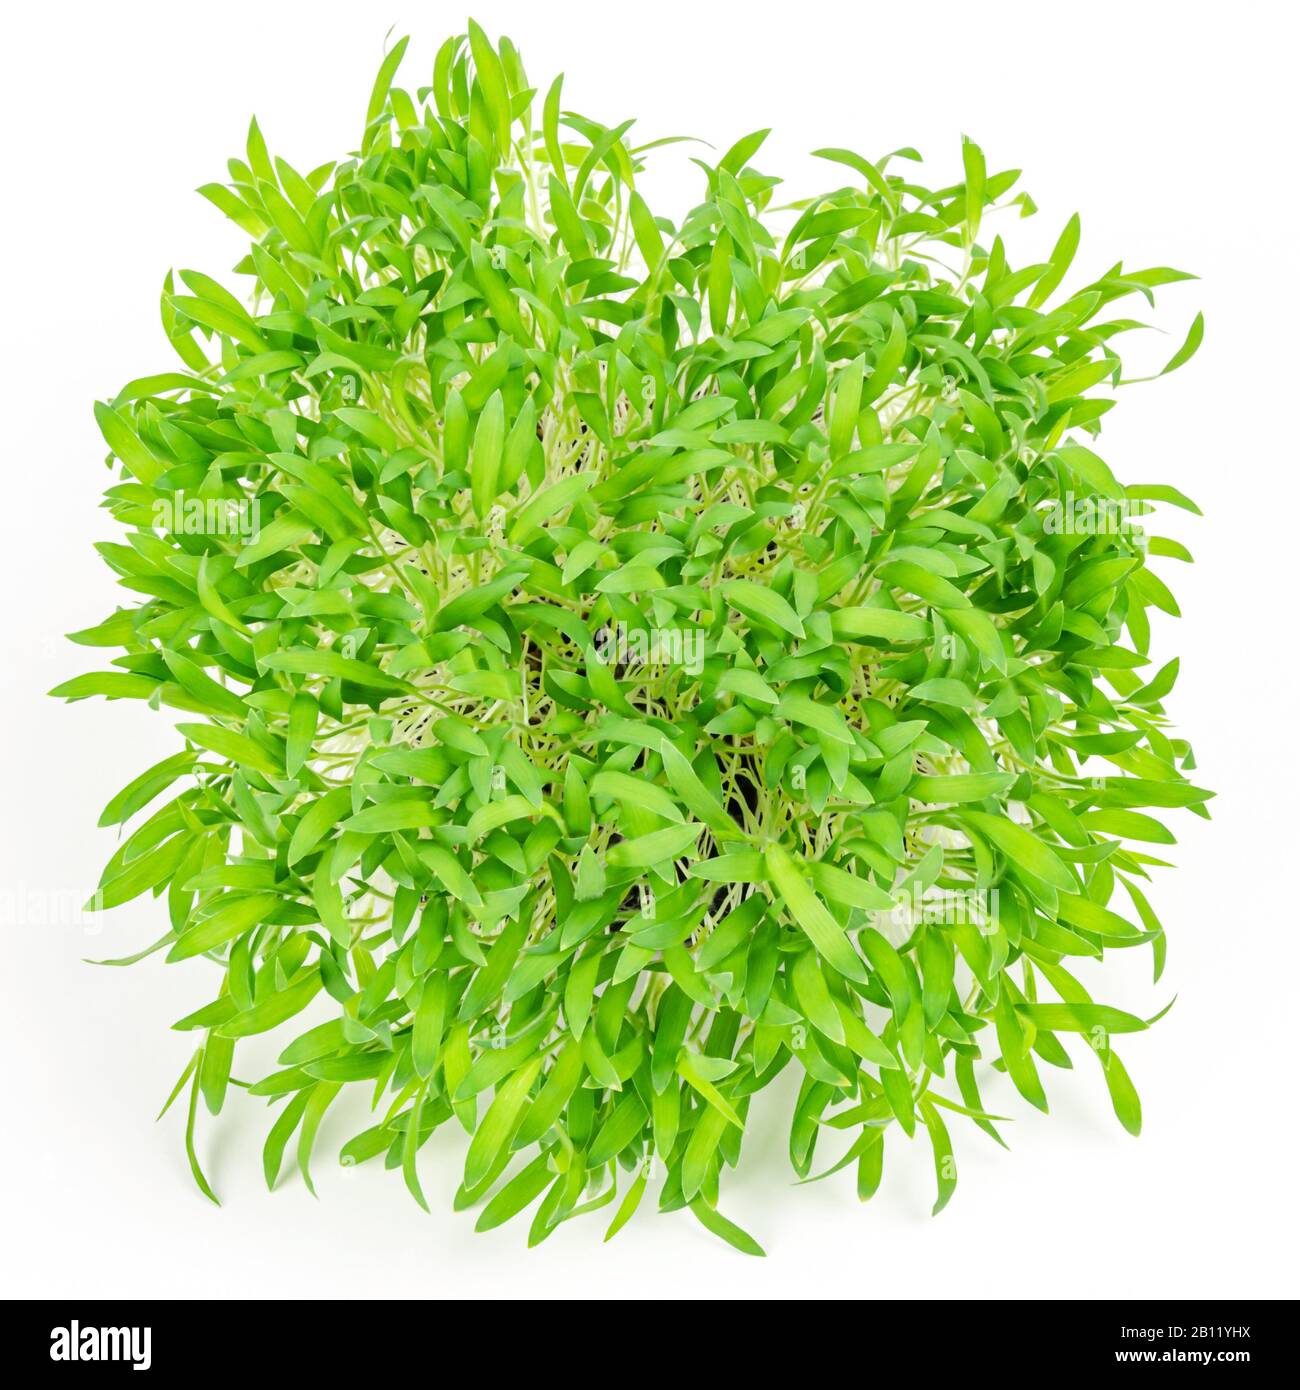 Brown millet microgreen from above, on white background. Shoots of Panicum miliaceum, also called proso millet. Sprouts, green seedlings, young plants Stock Photo